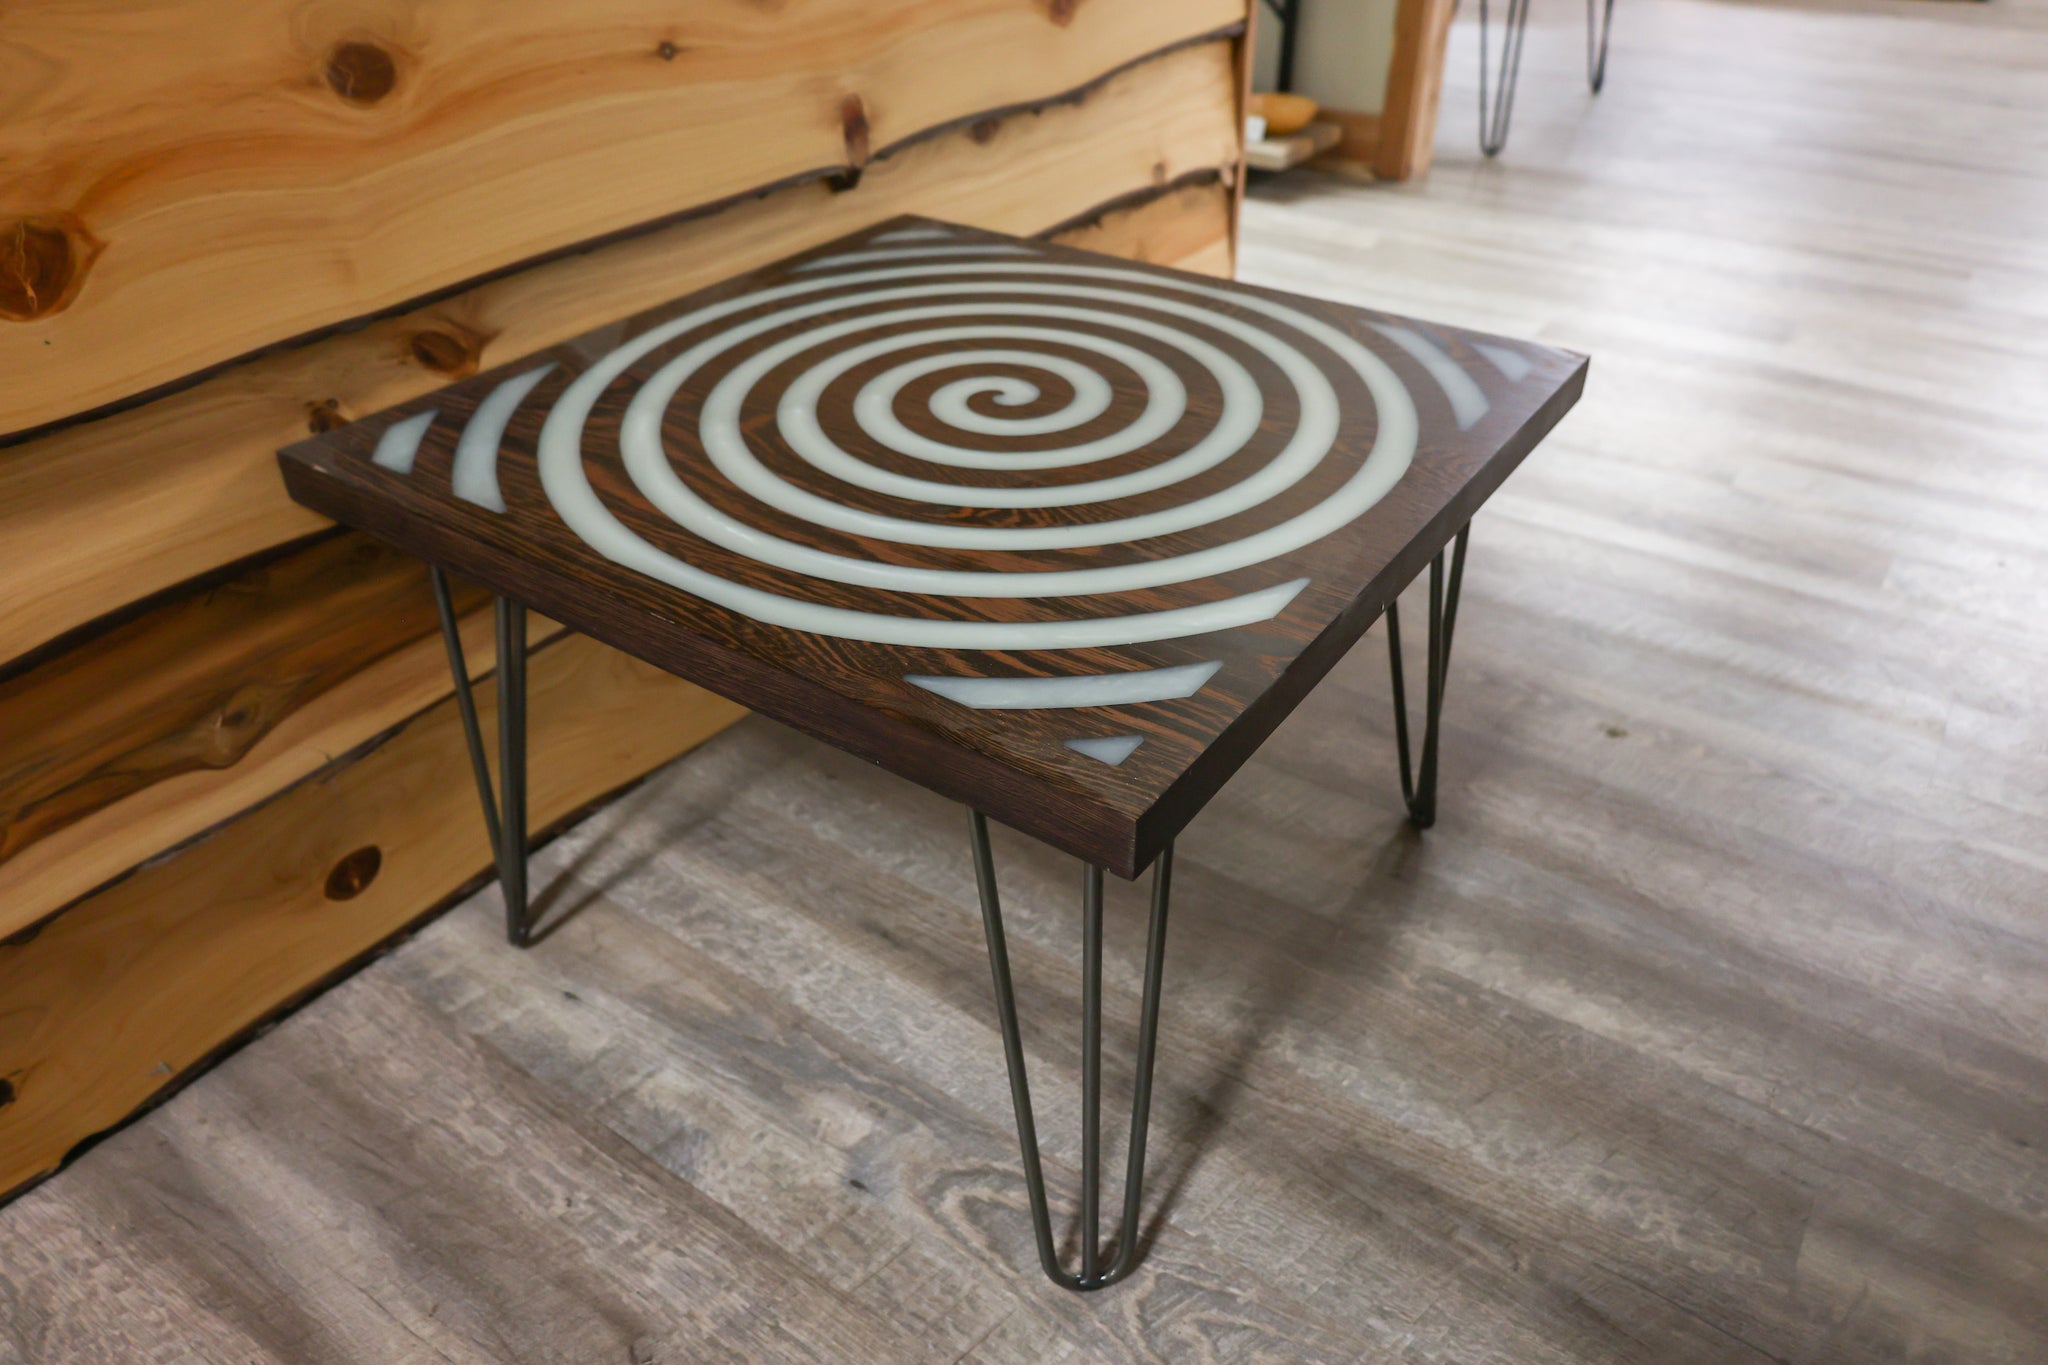 Paduch Spiral Table with Black Hair Pin Legs - #93